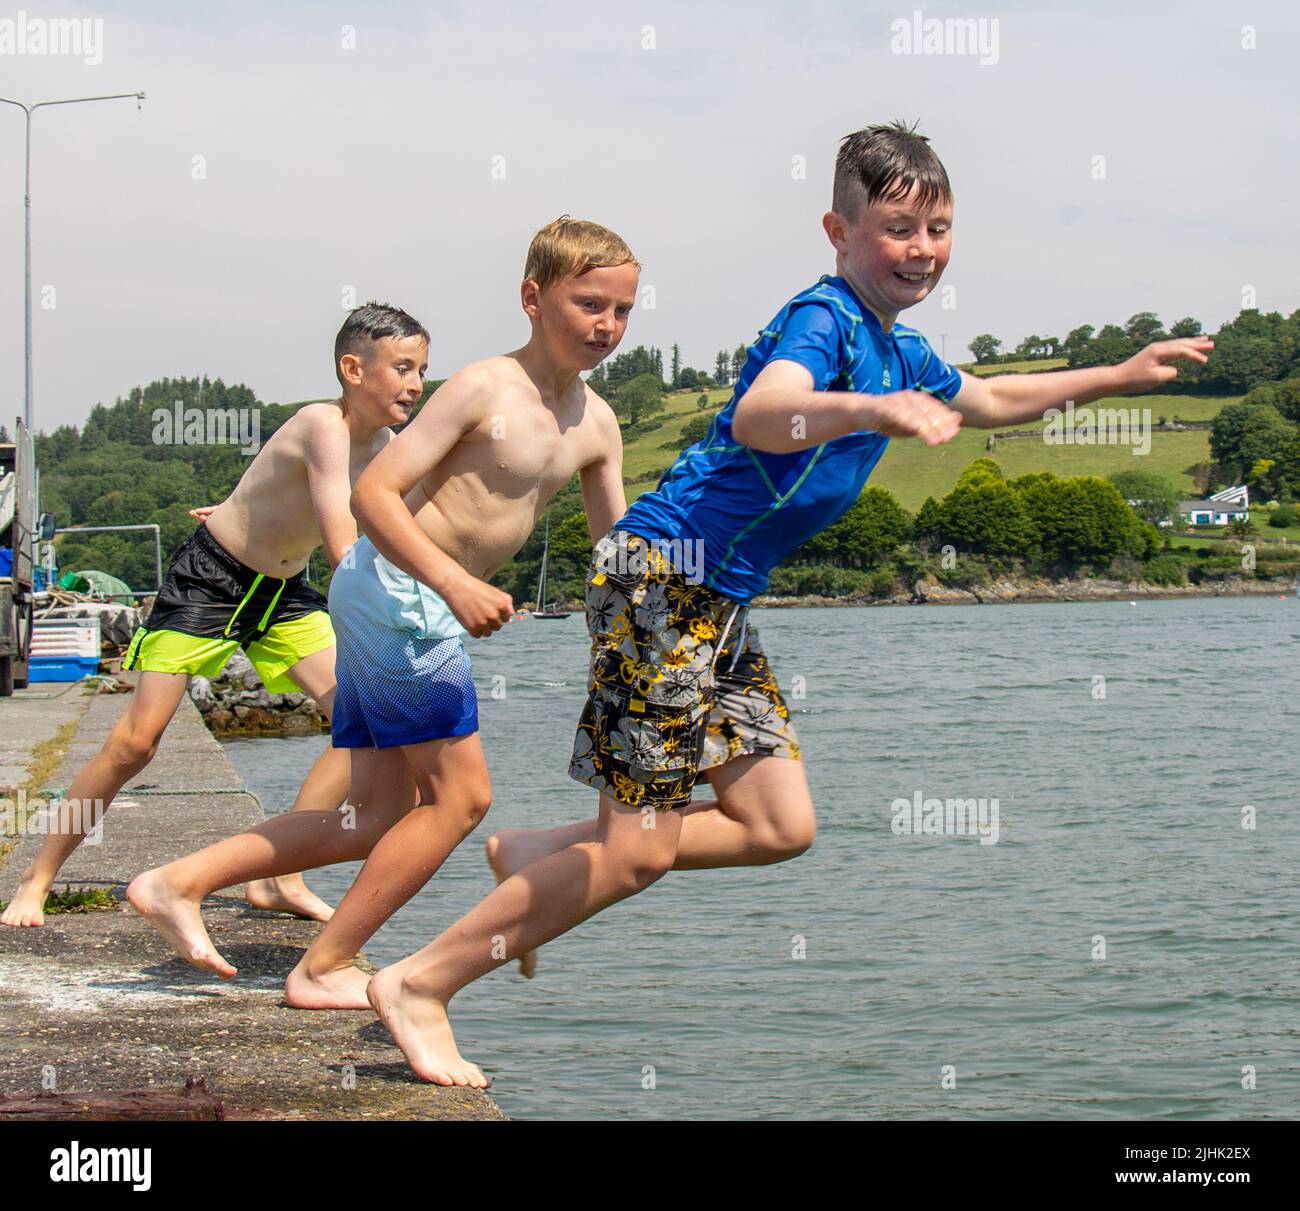 Children on summer holiday or vacation jumping into the sea. Stock Photo